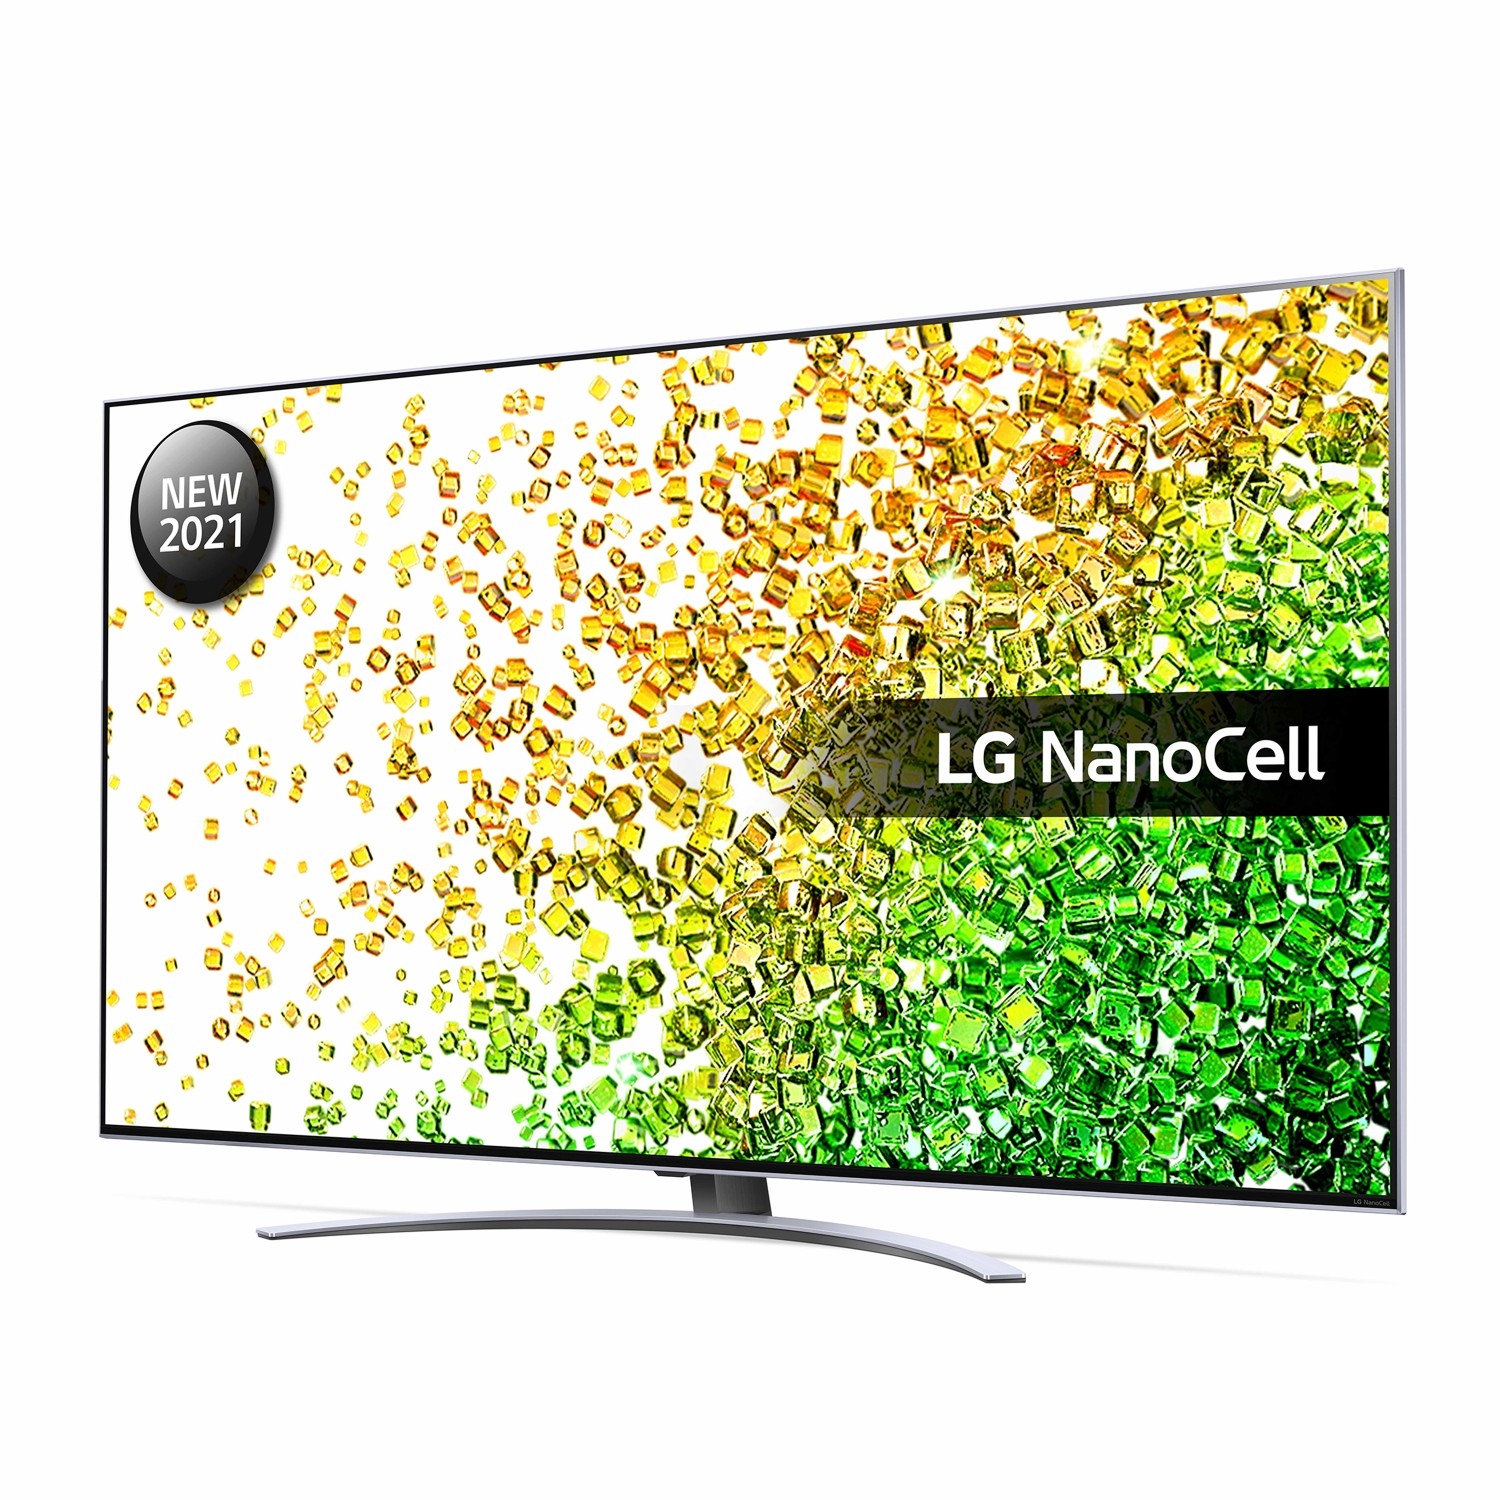 LG 65NANO886PB 65" 4K Ultra HD HDR NanoCell LED Smart TV with Freeview Play Freesat HD & Voice Assistants - 9